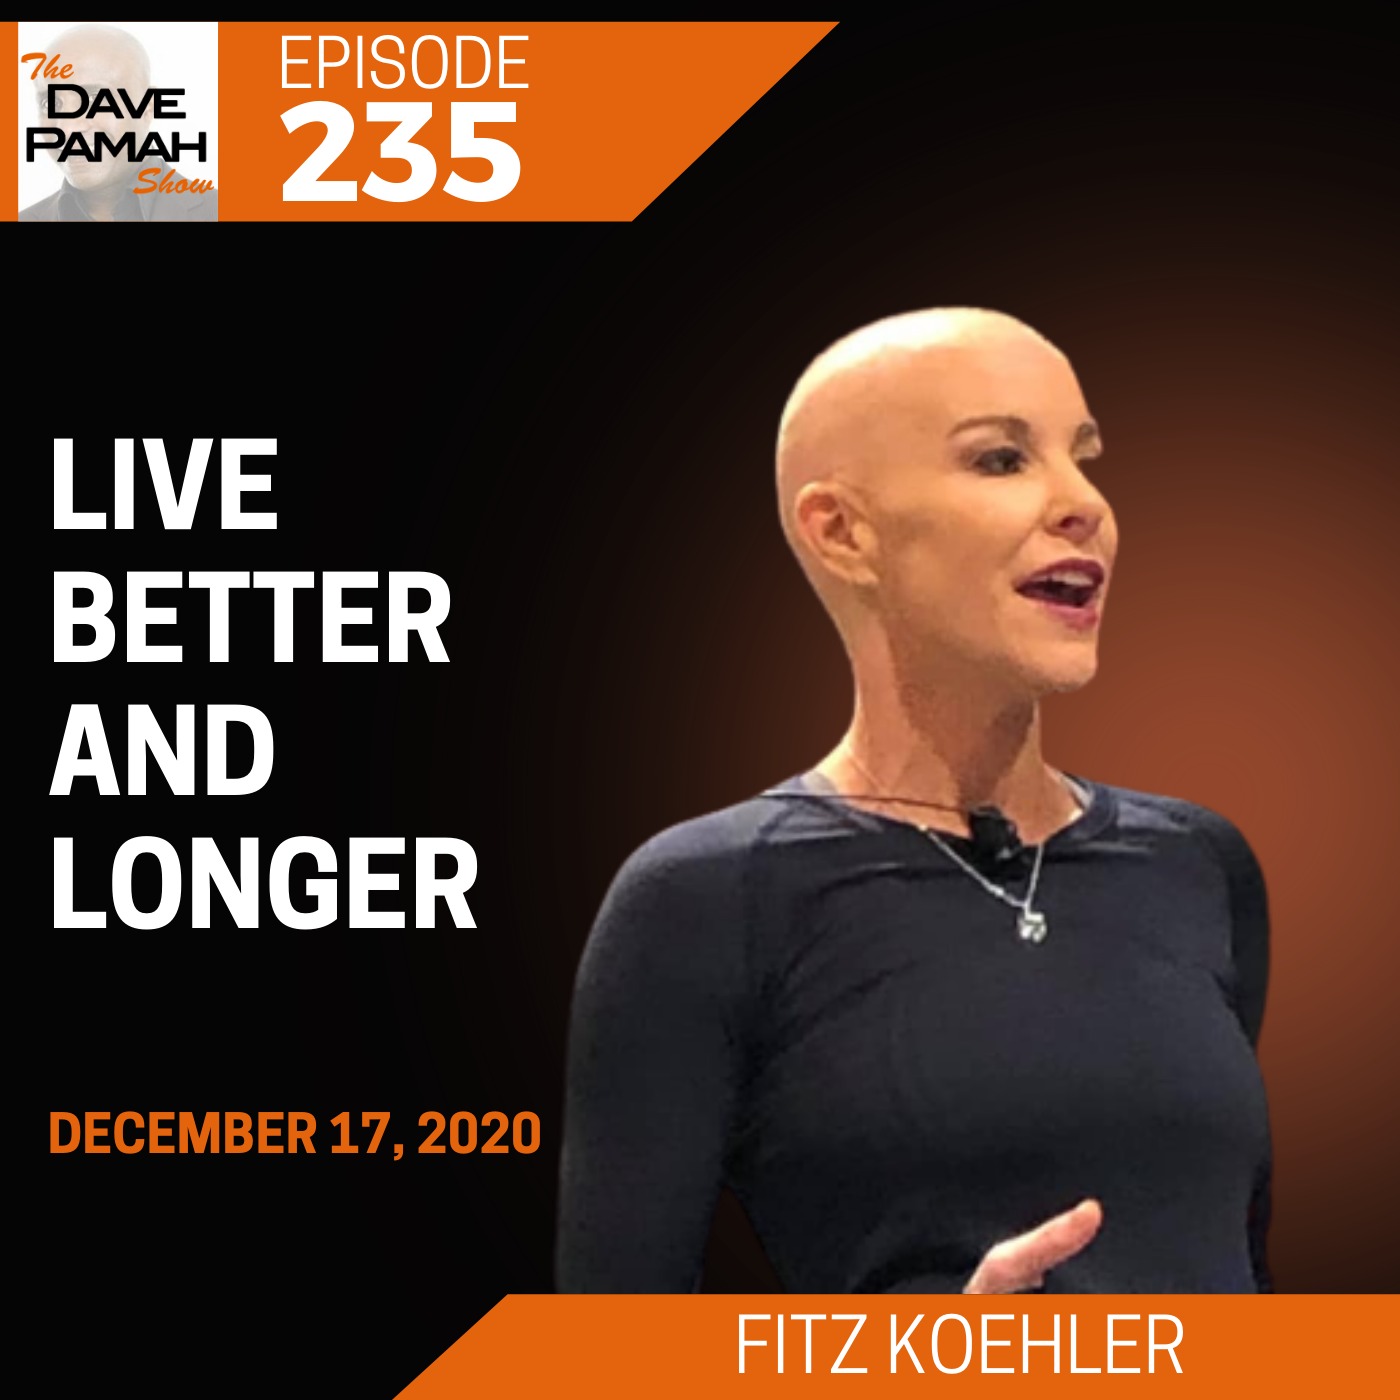 Live better and longer with Fitz Koehler